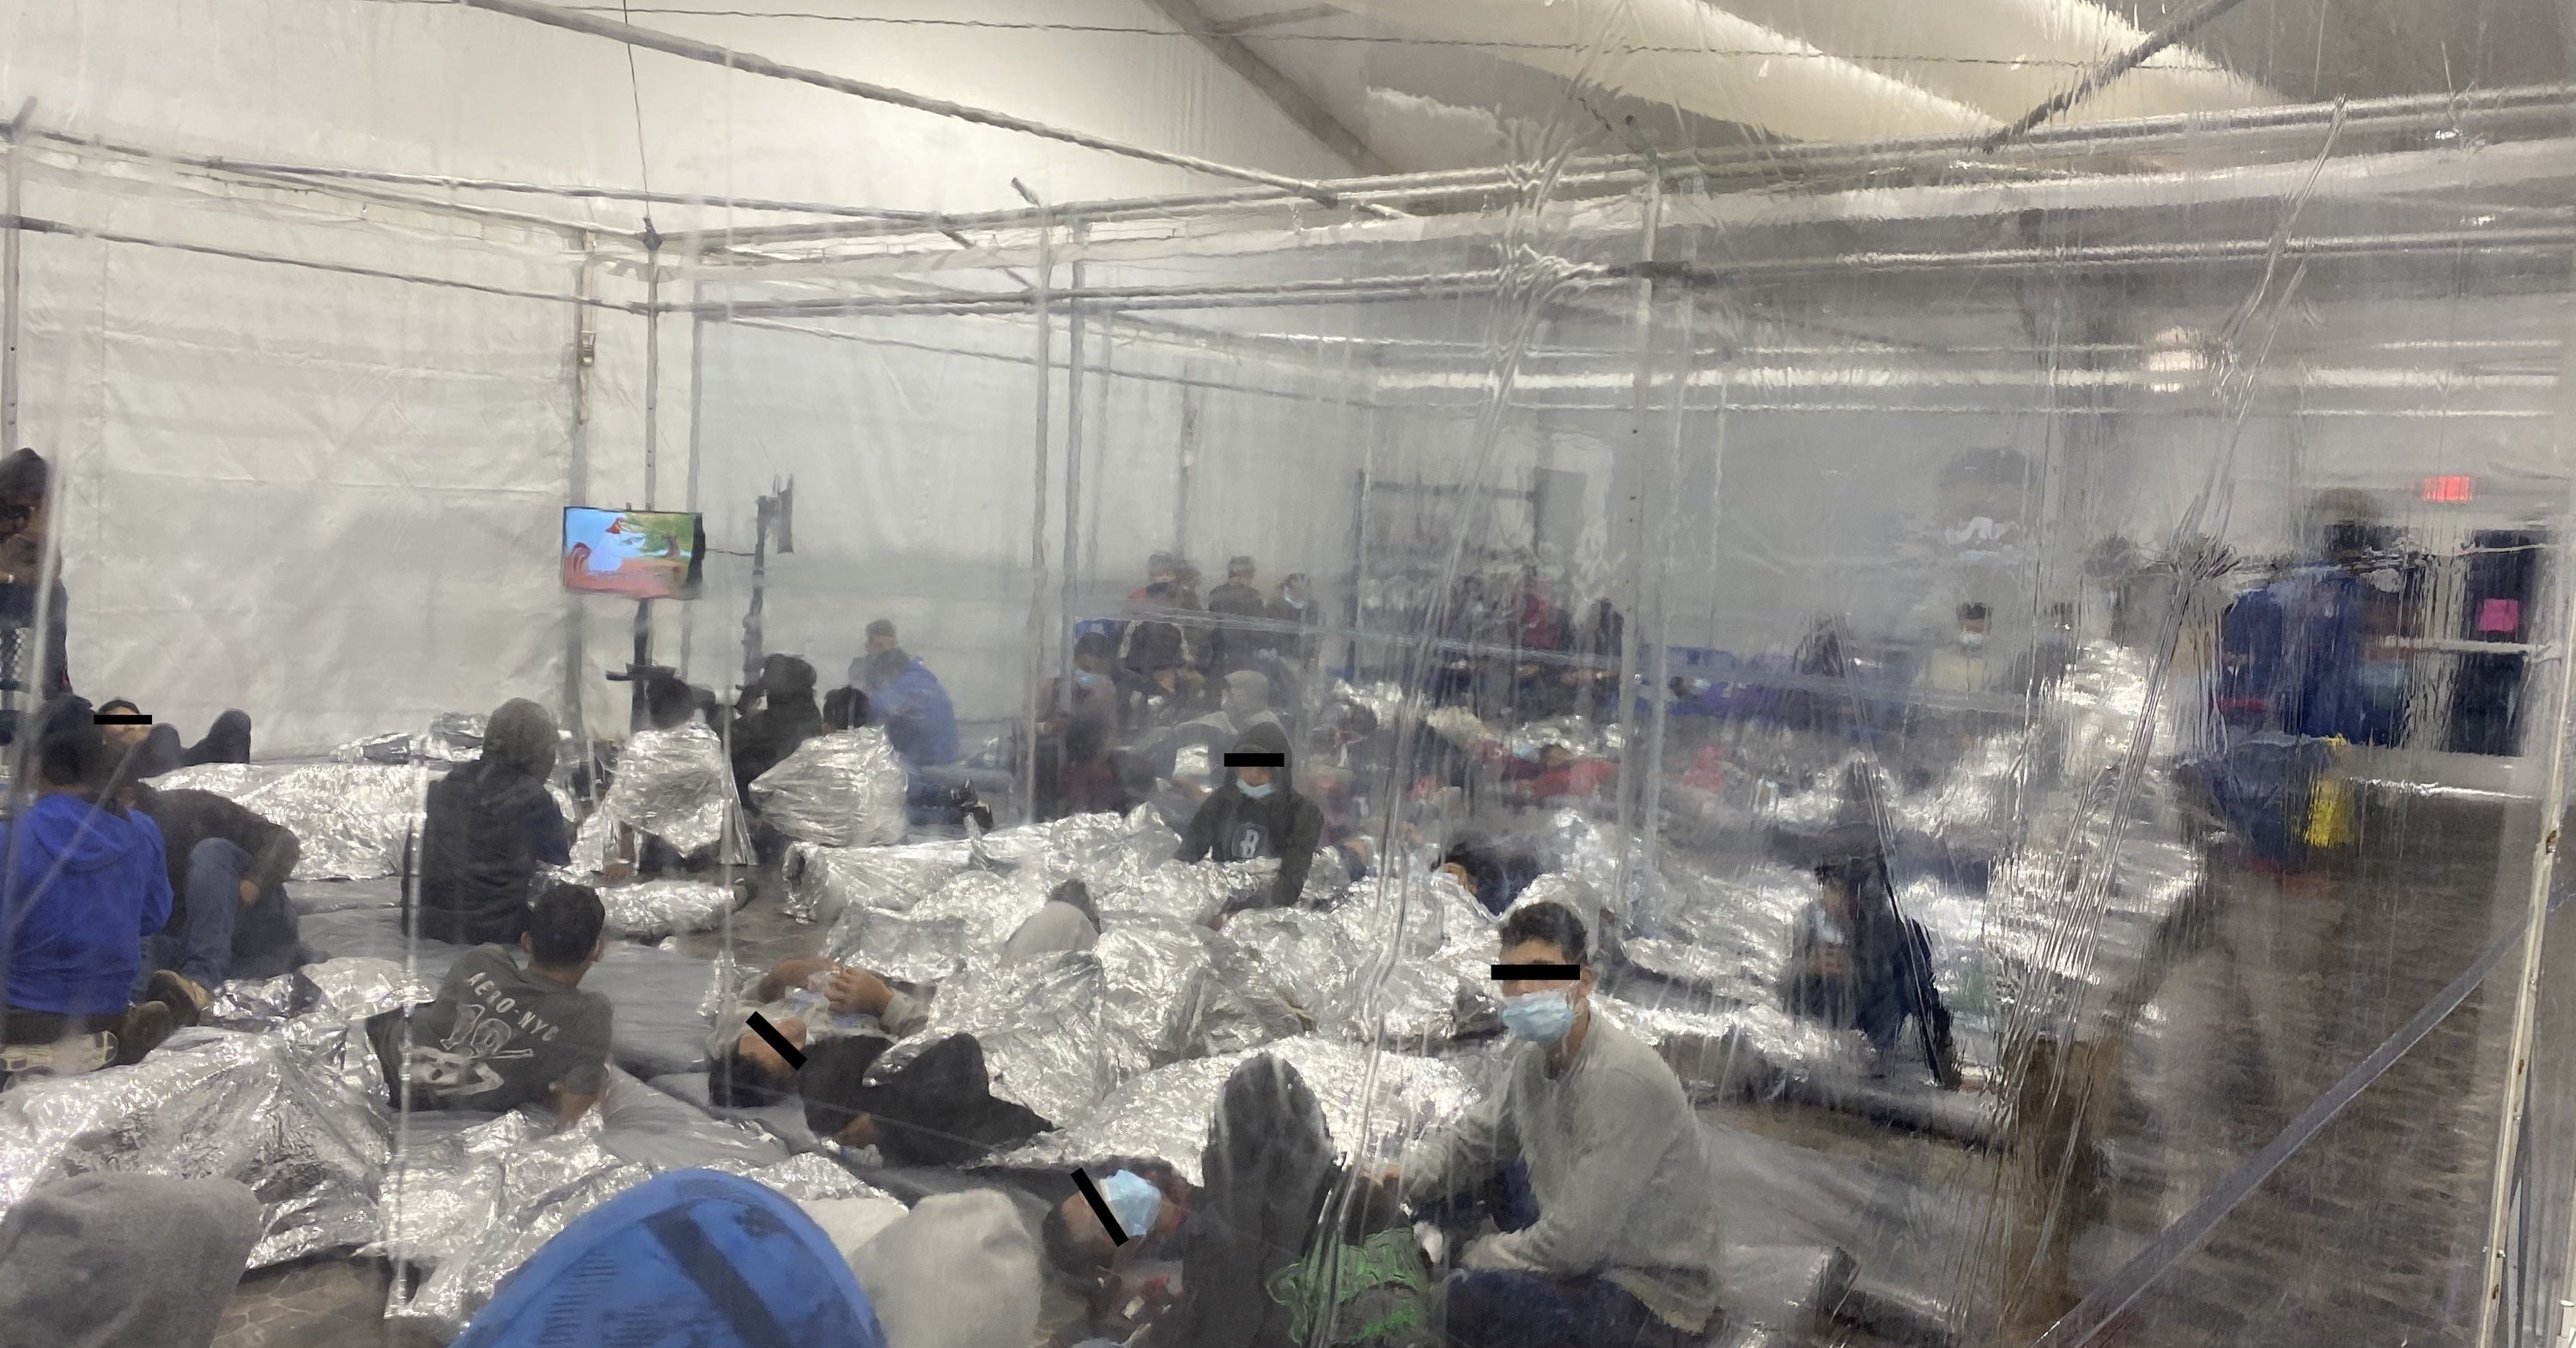 New photos show crowded campsites for minors at the border